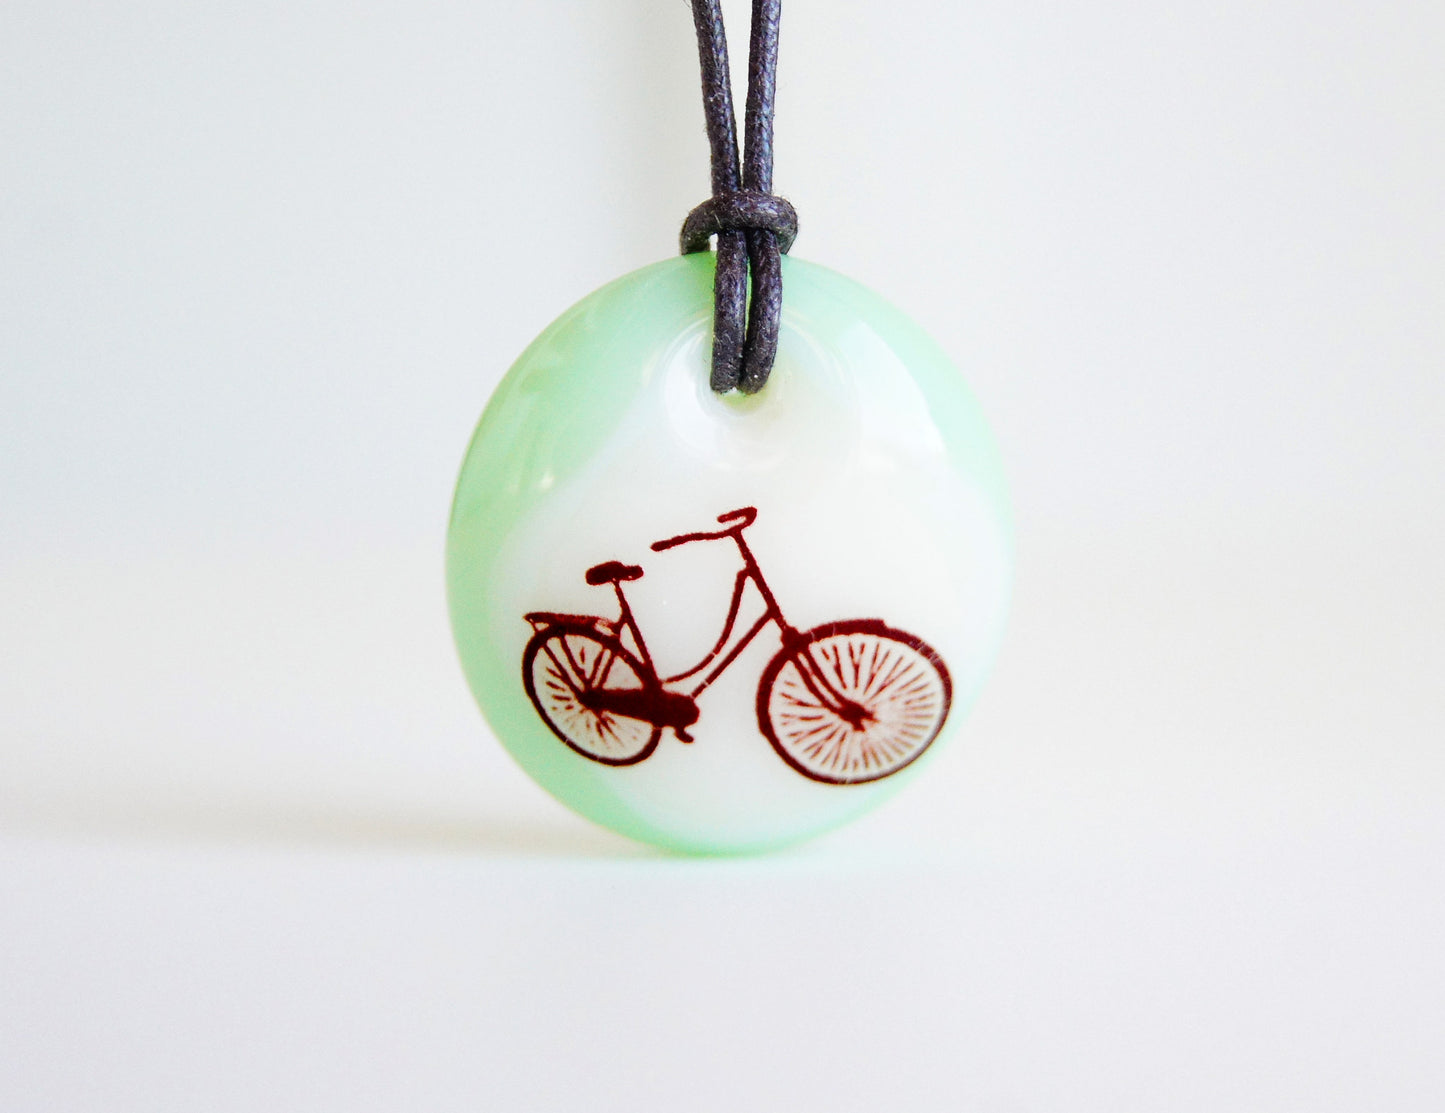 Bicycle pendant necklace in mint green.